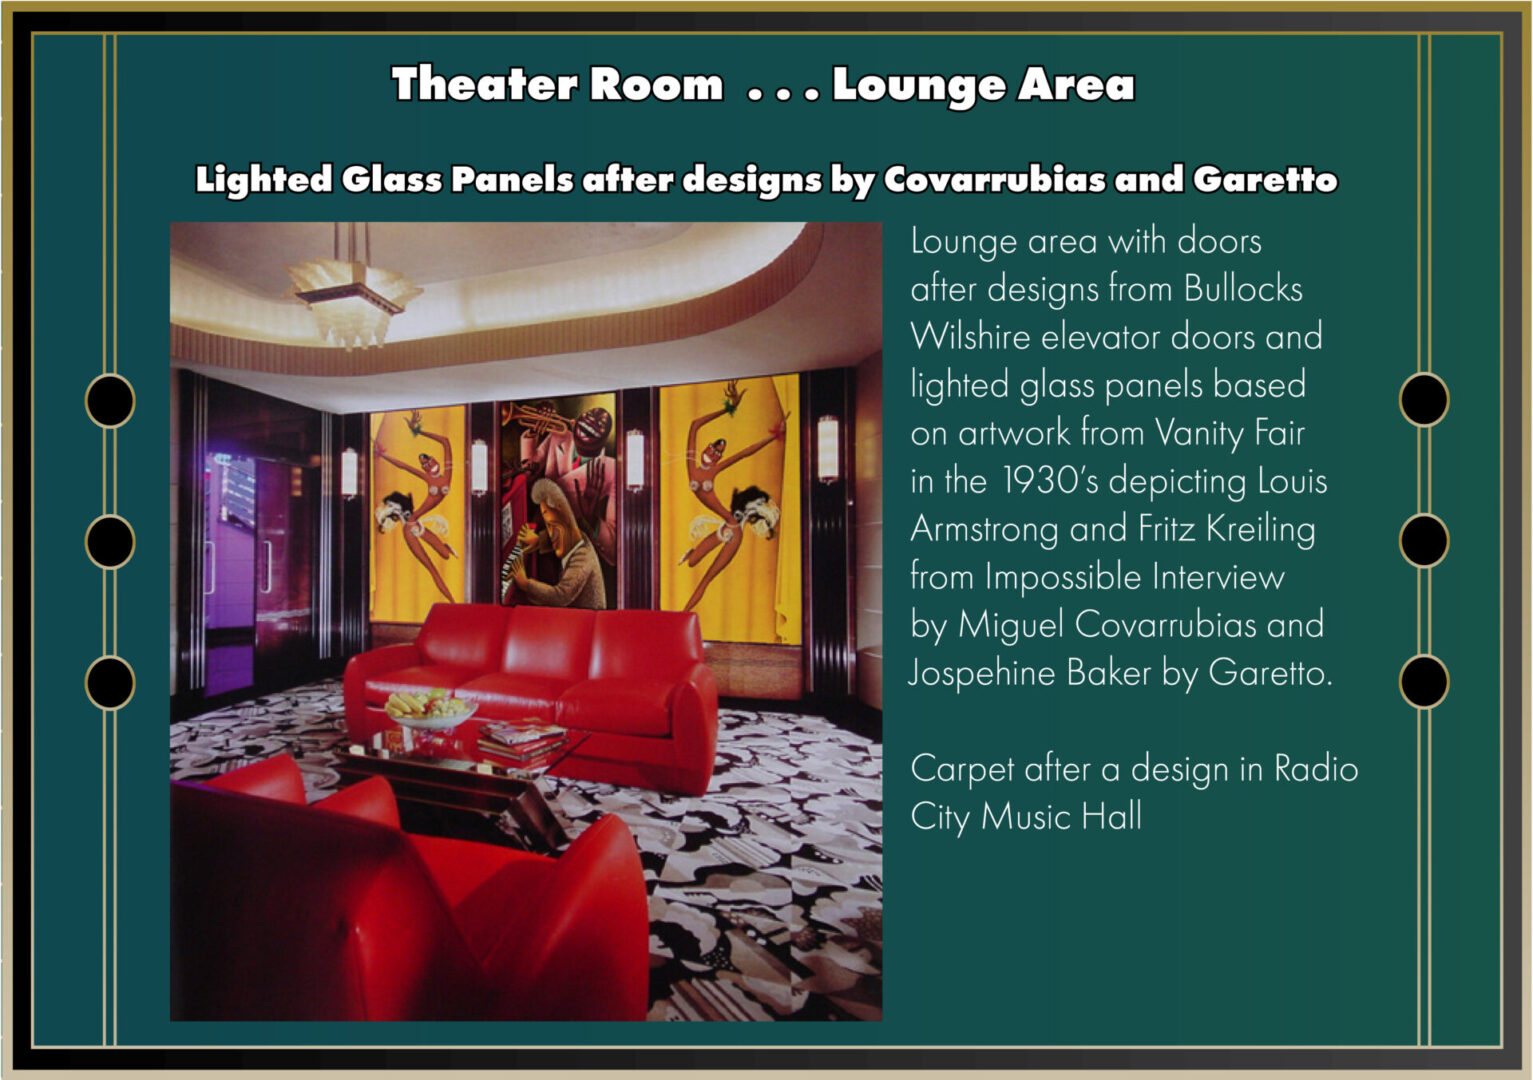 Lounge area of Theater Room with Lighted Glass Panels